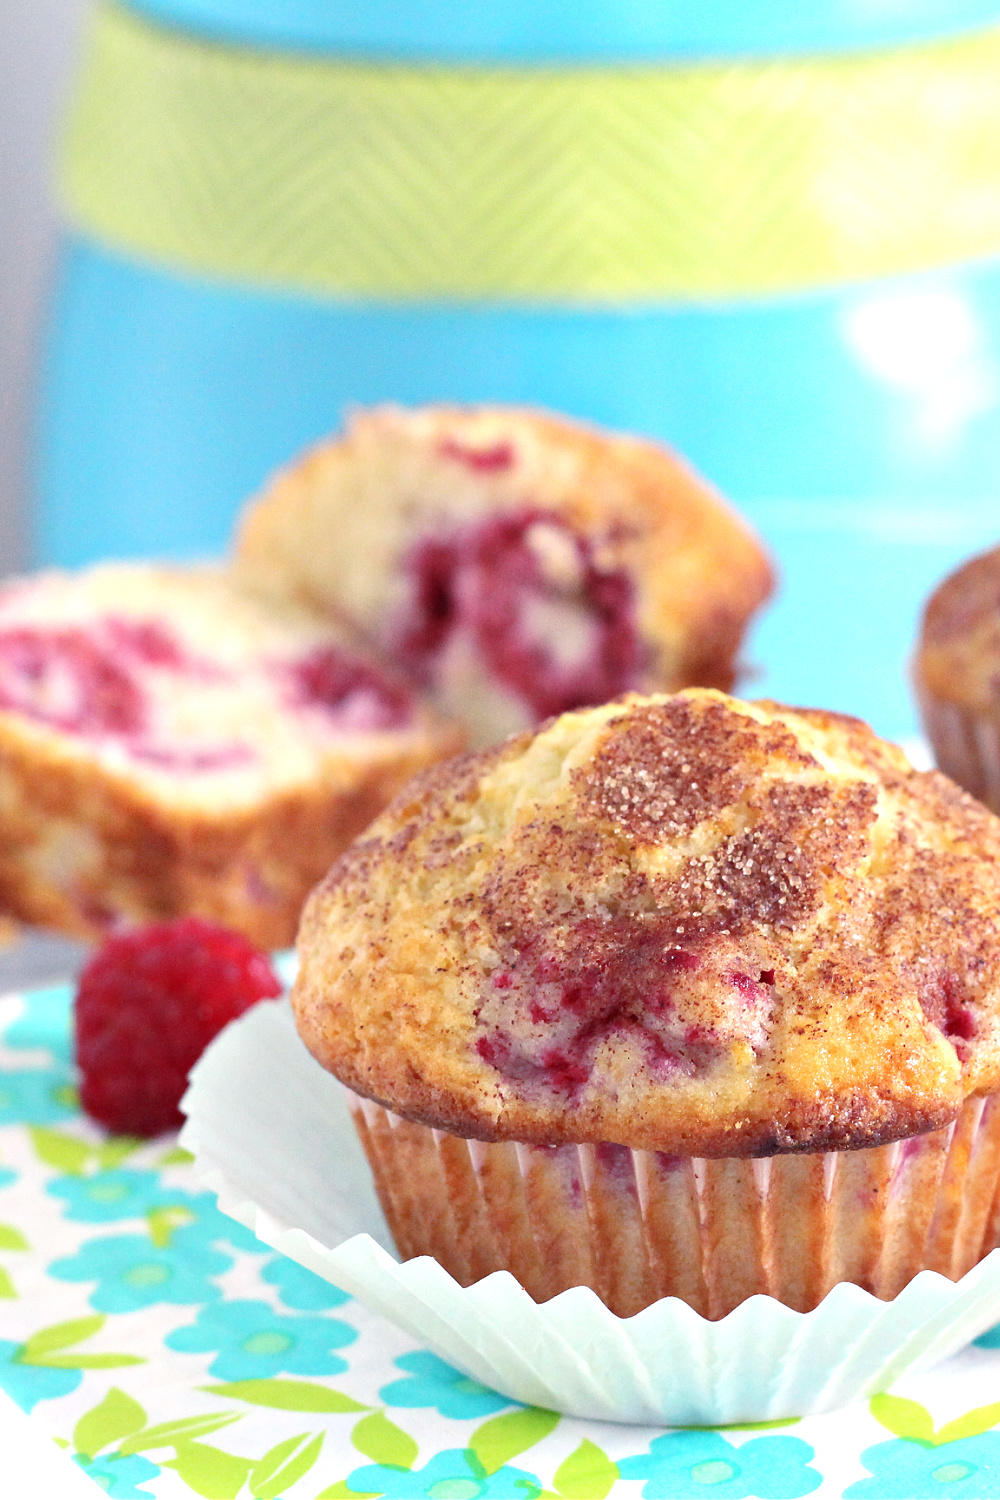 Easy recipe for classic muffin with your favorite berry. These very berry muffins are filled with raspberries with or without an orange glaze frosting.